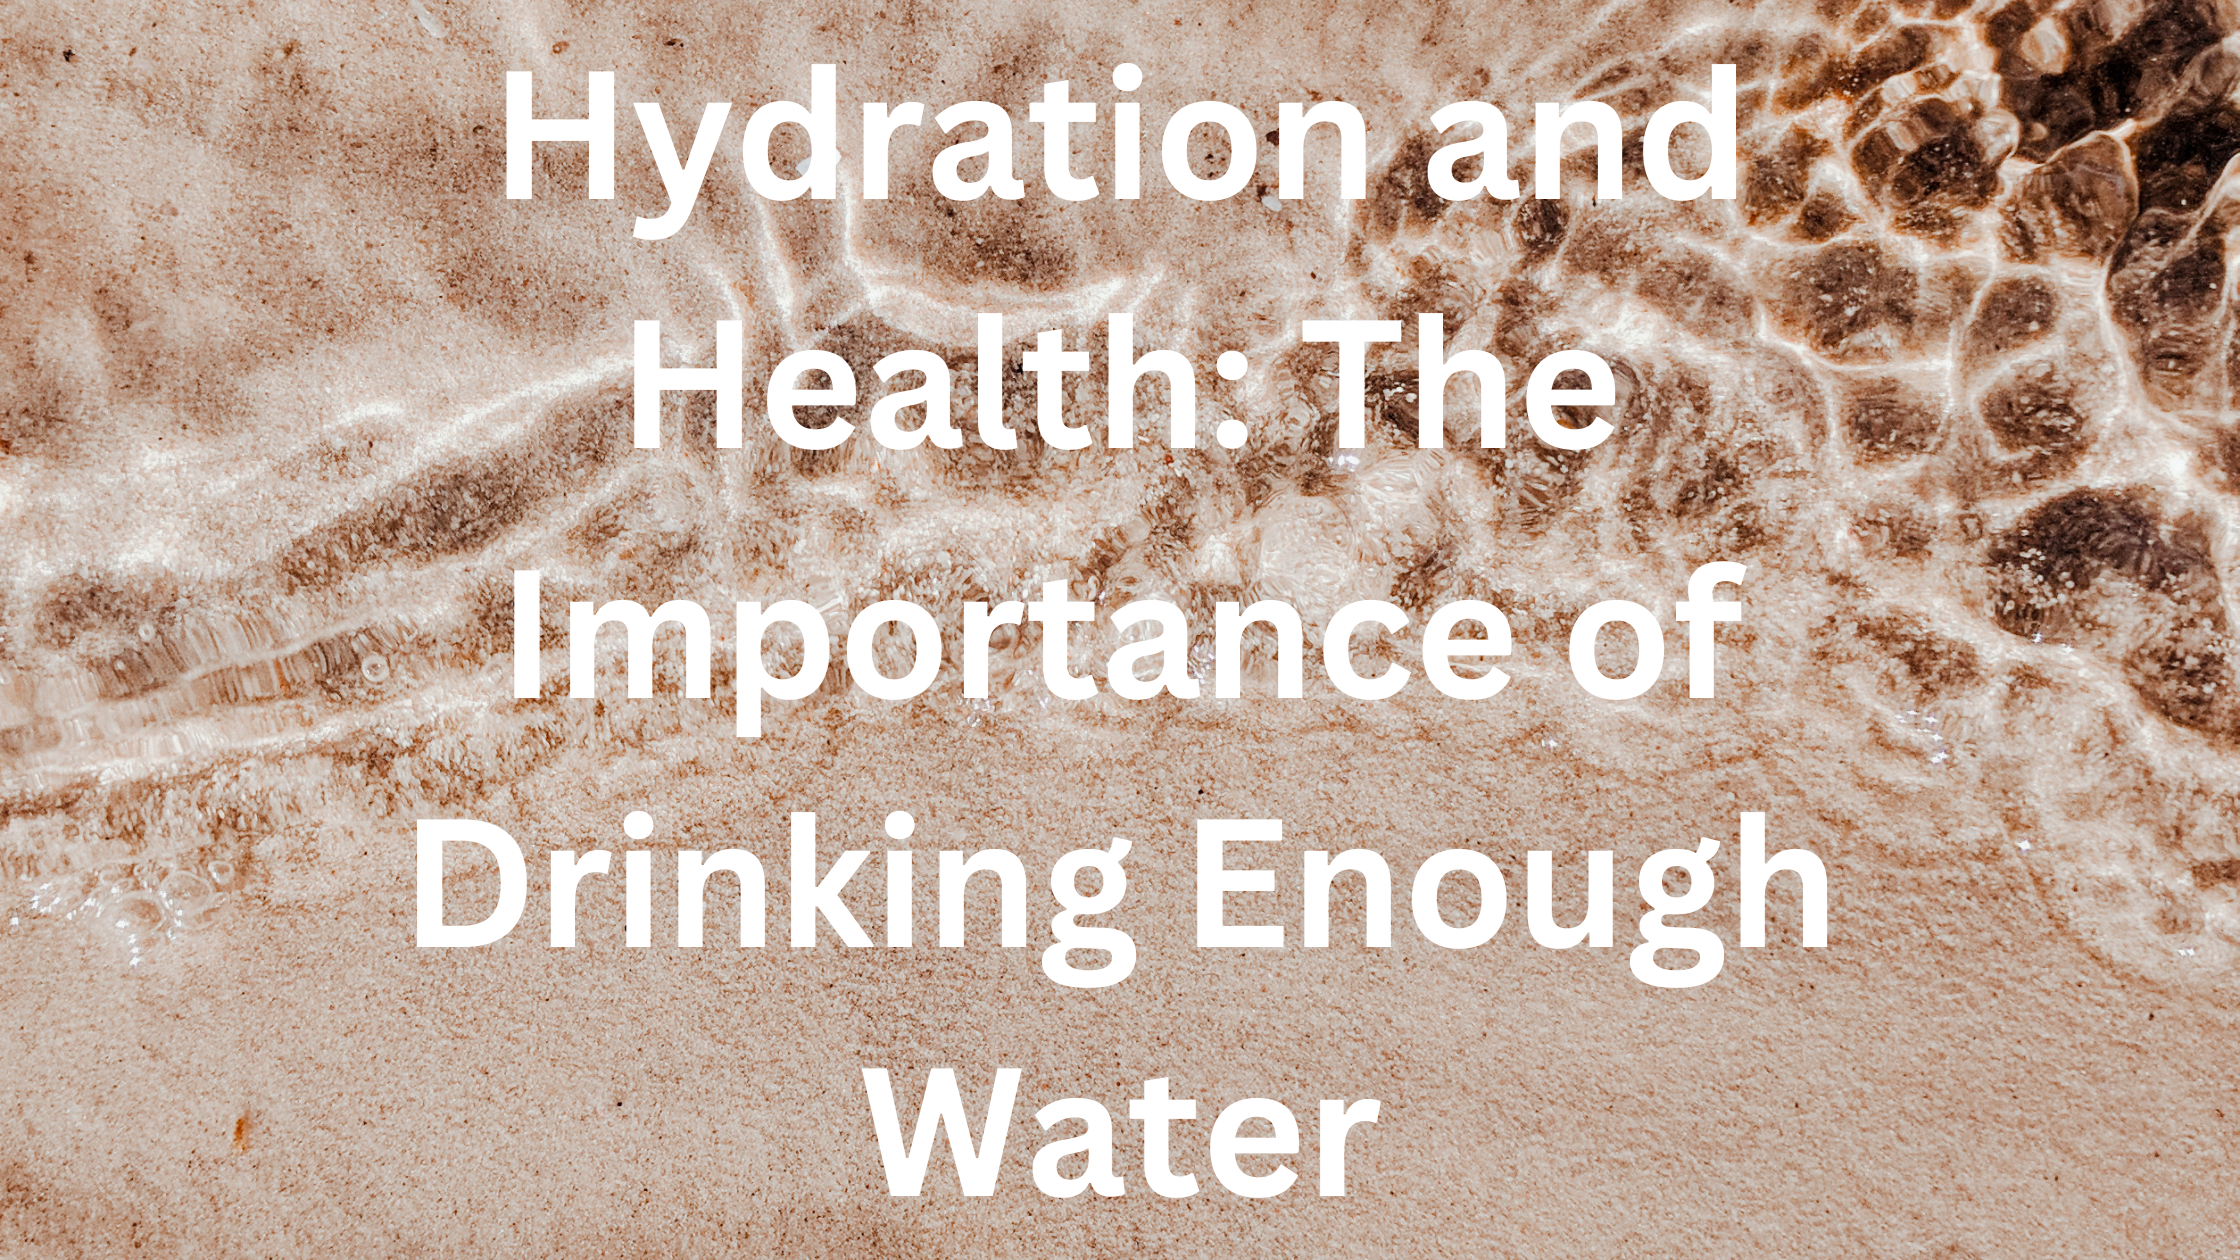 Hydration and Health: The Importance of Drinking Enough Water